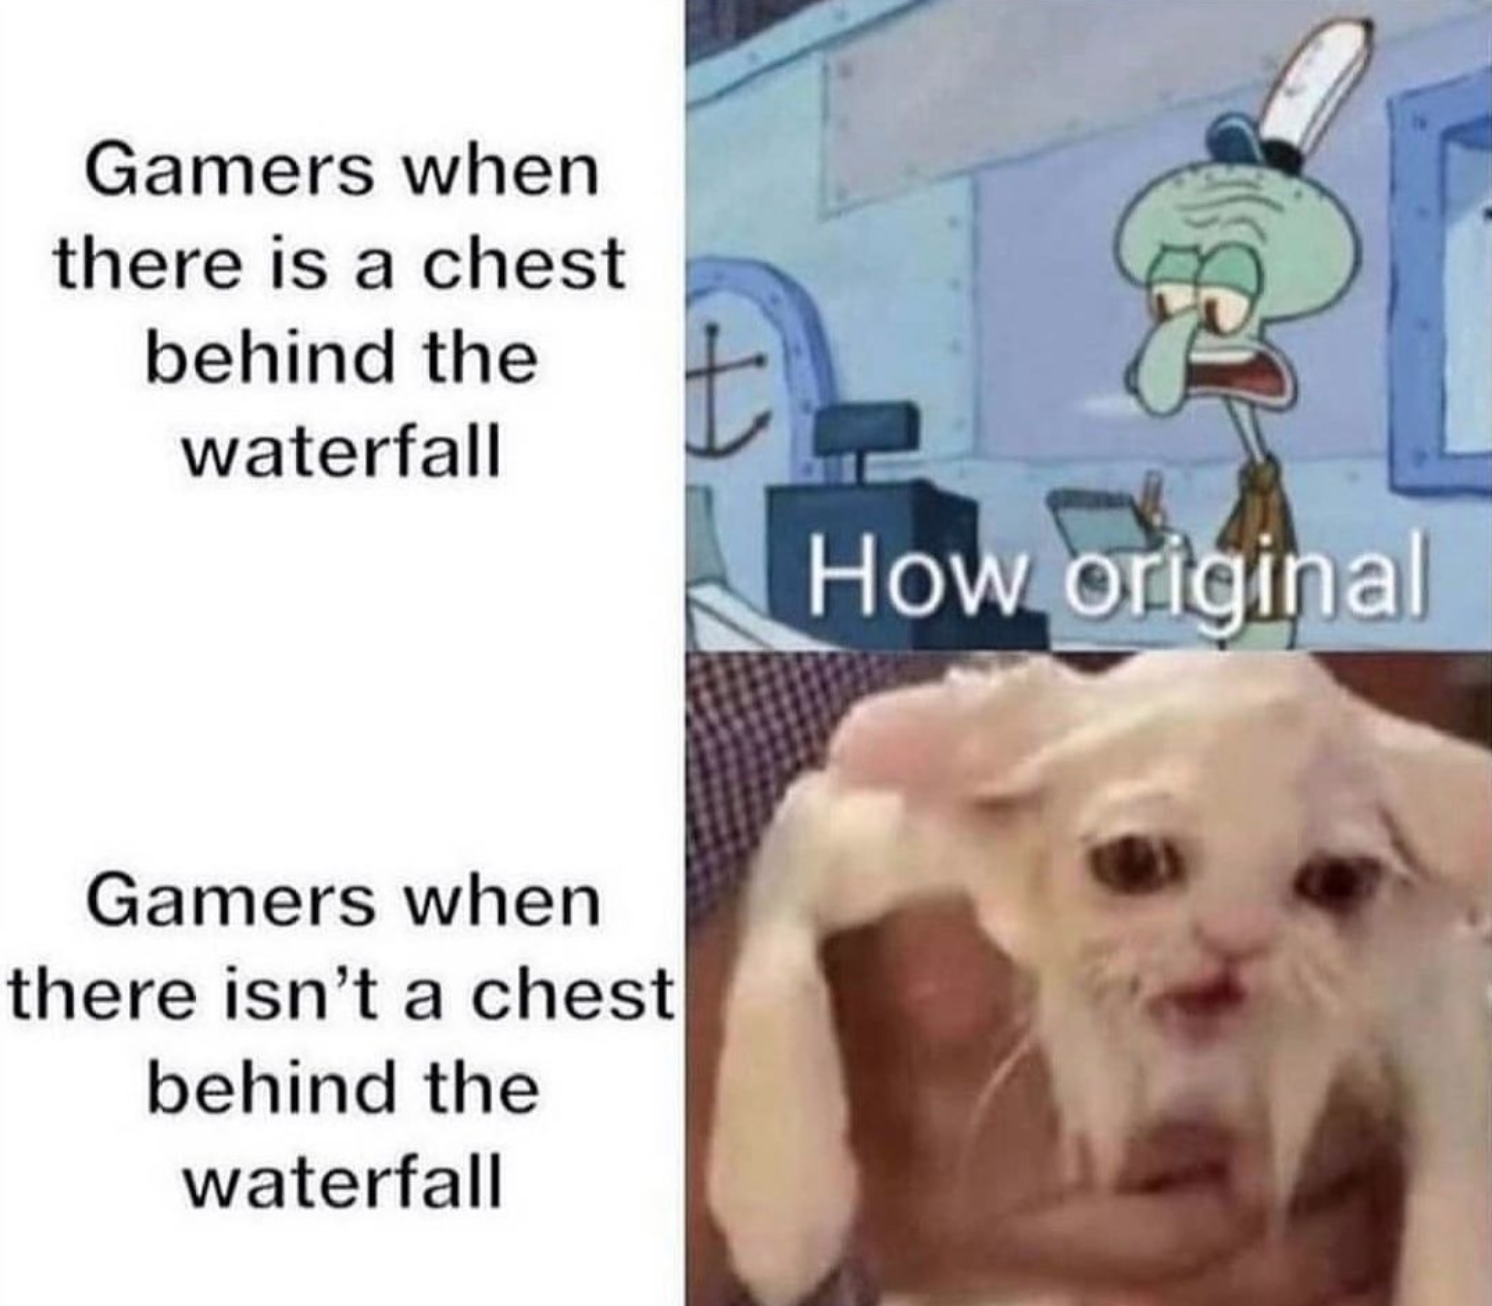 funny gaming memes - there's a chest behind the waterfall - Gamers when there is a chest behind the waterfall t How original Gamers when there isn't a chest behind the waterfall